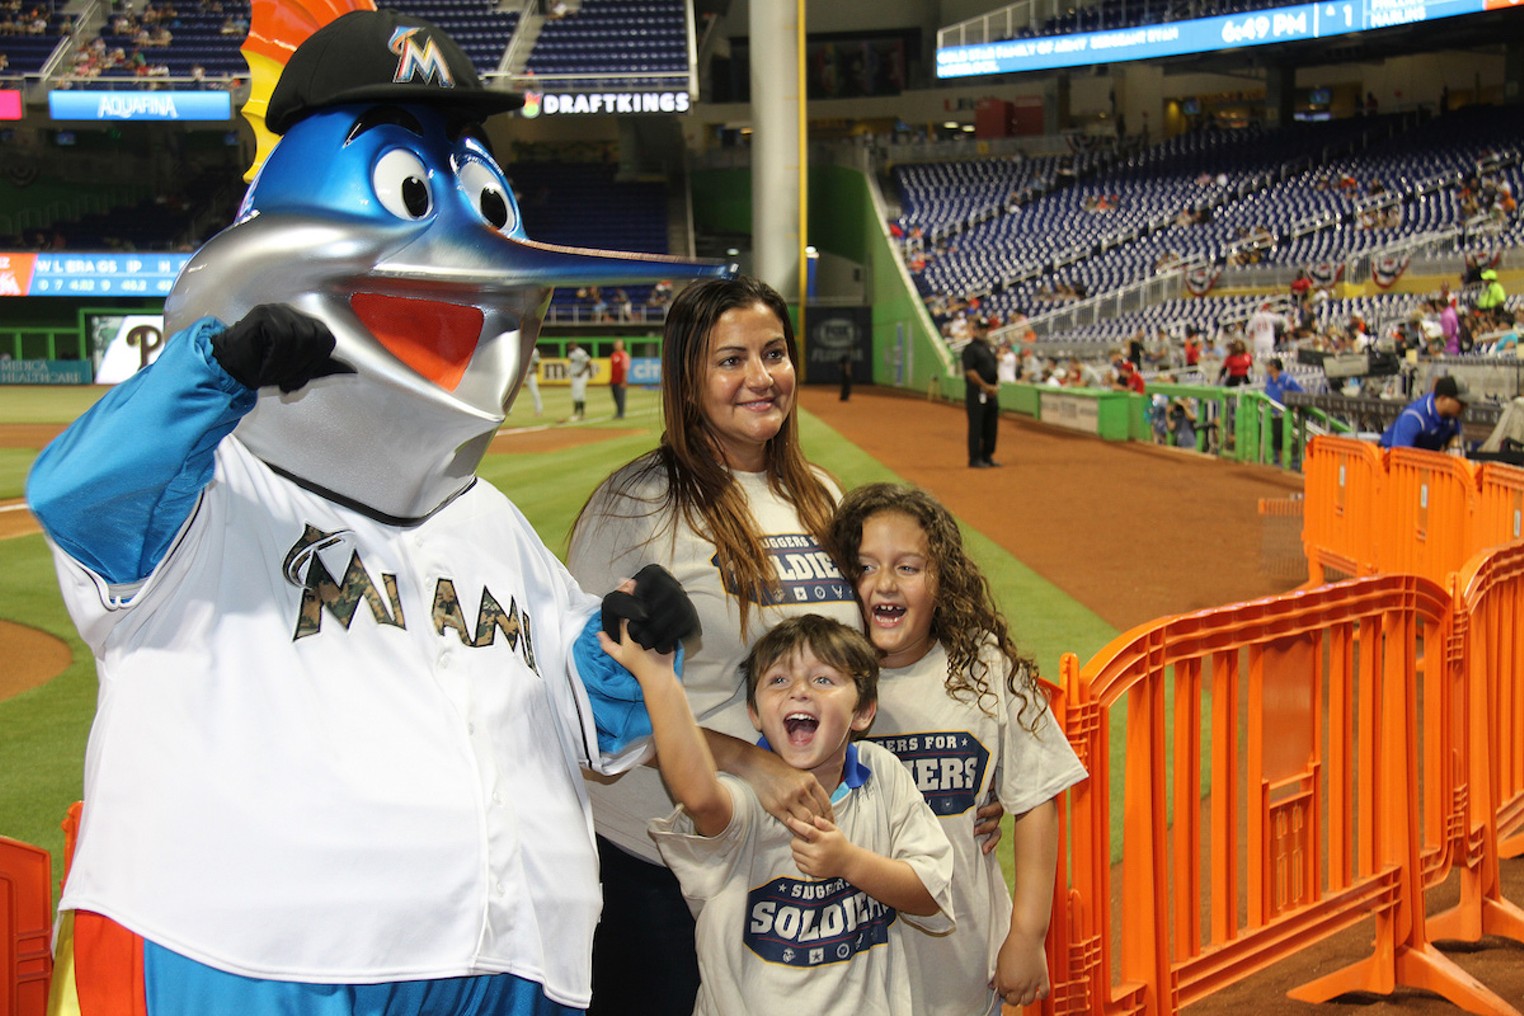 World Series fan creates buzz with Marlins jersey